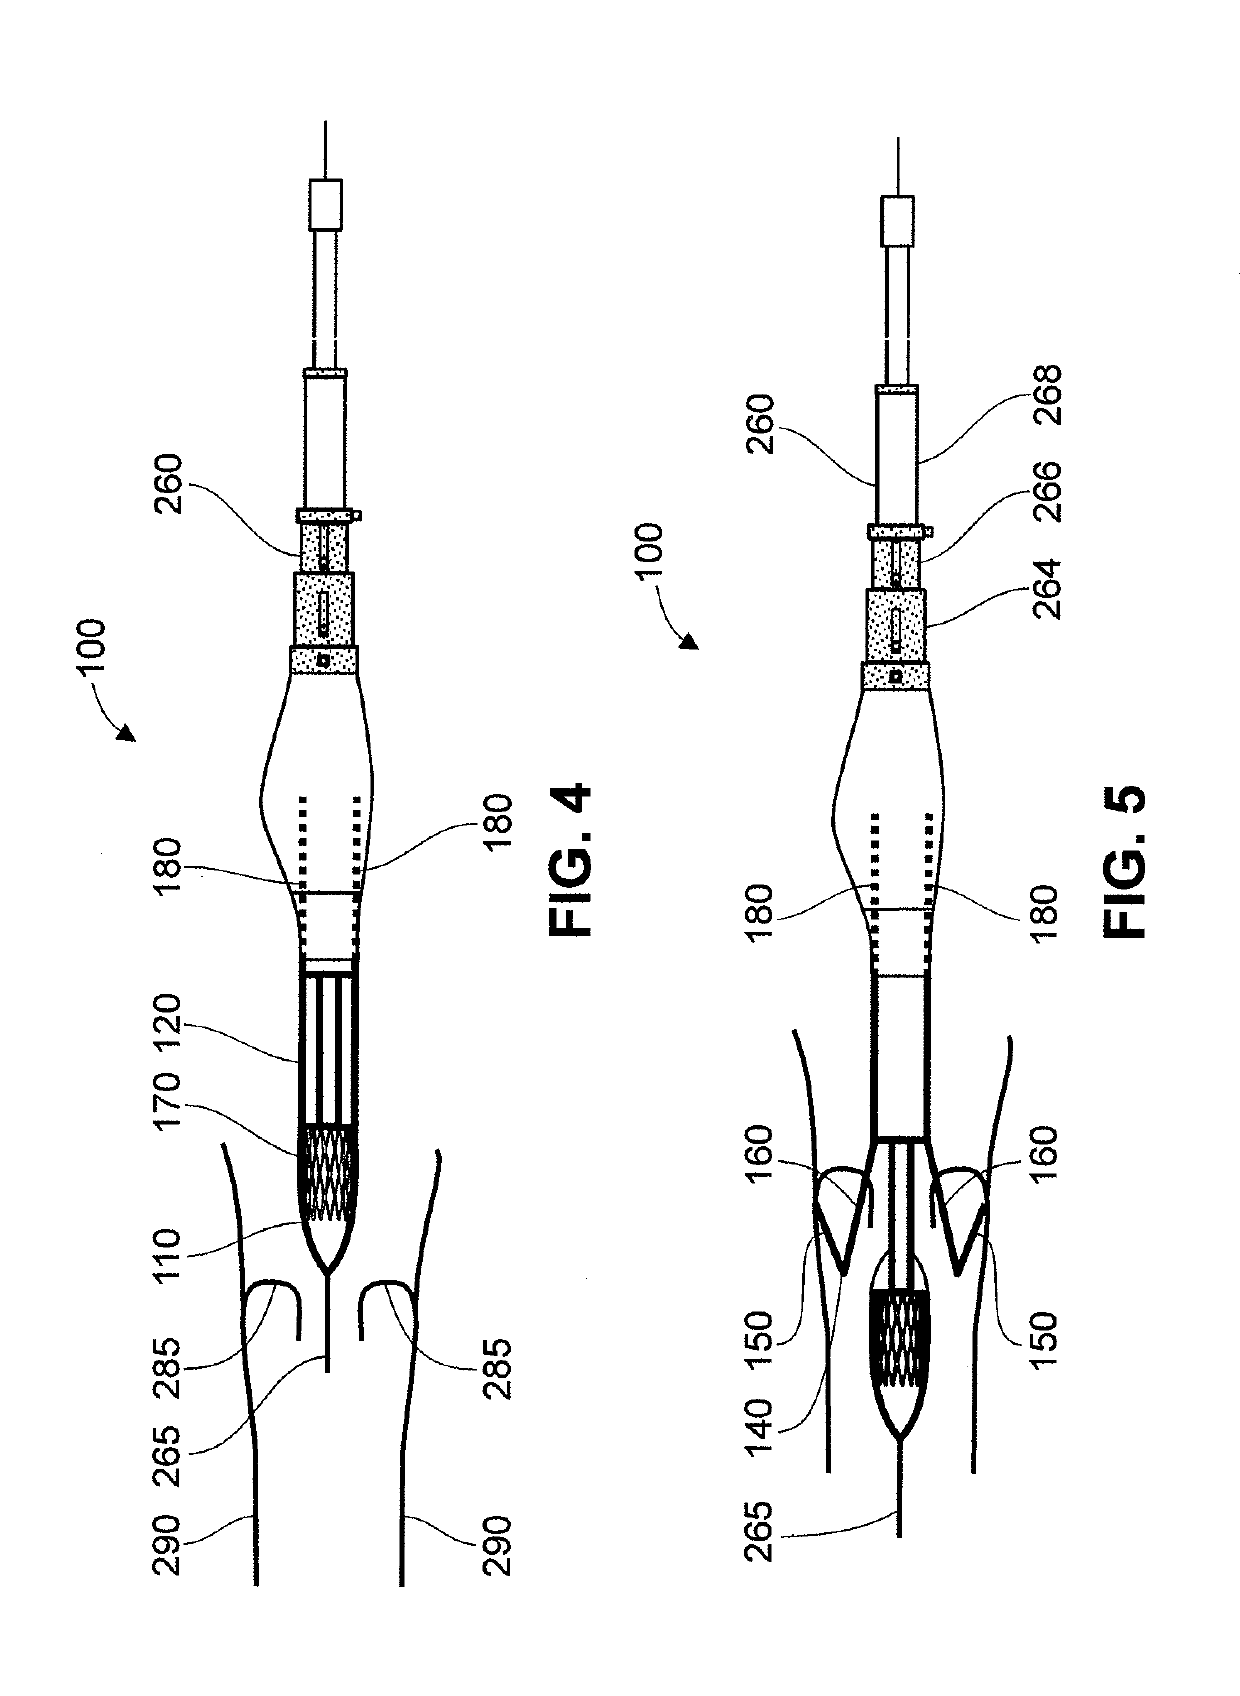 Sutureless valve prosthesis delivery device and methods of use thereof